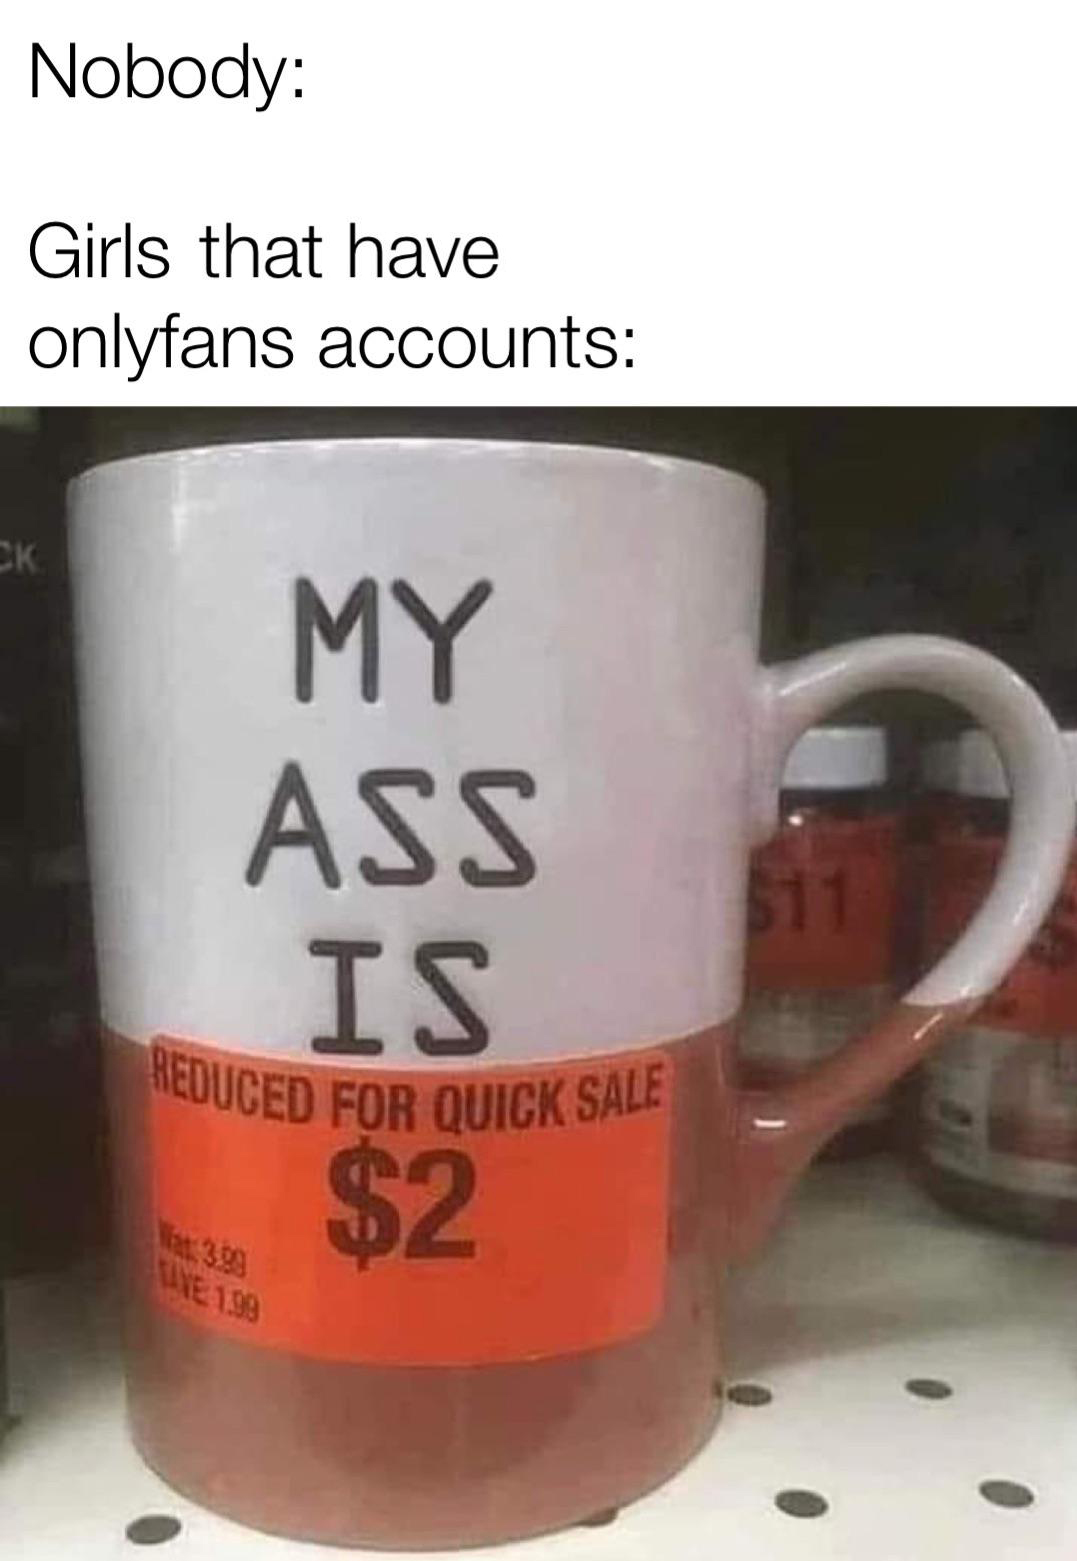 dank memes - funny memes - mug - Nobody Girls that have onlyfans accounts Ok My Ass Is $2 111 Reduced For Quick Sale E198